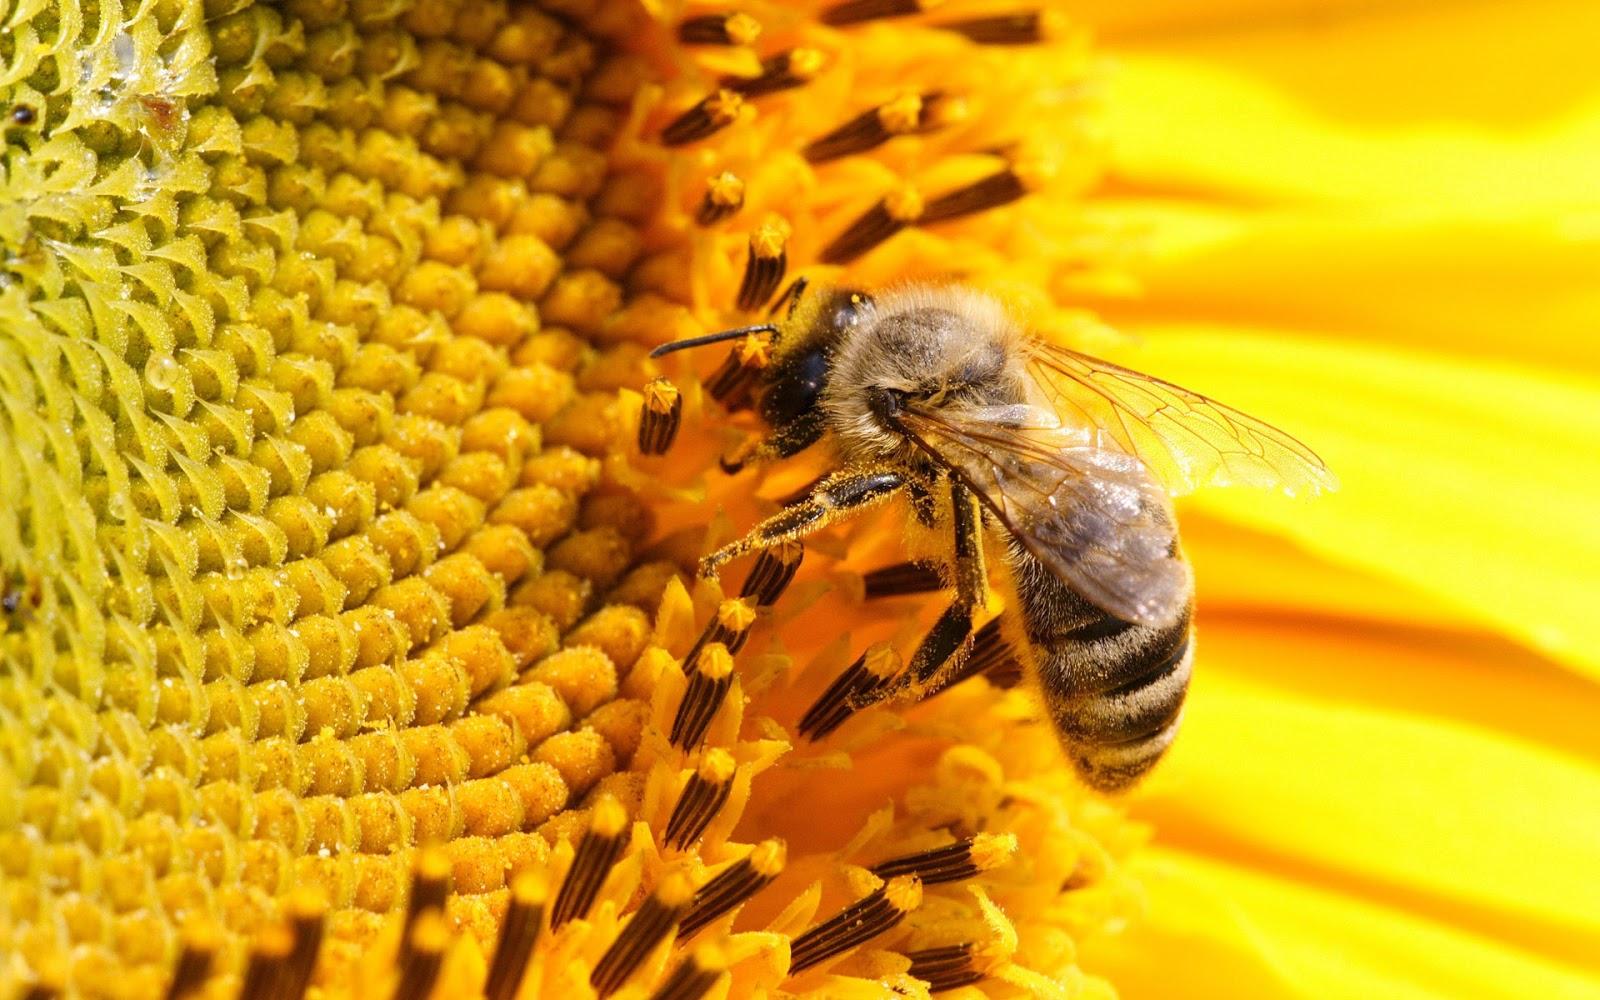 Latest Bee HD Wallpaper Image And Photo Free Download